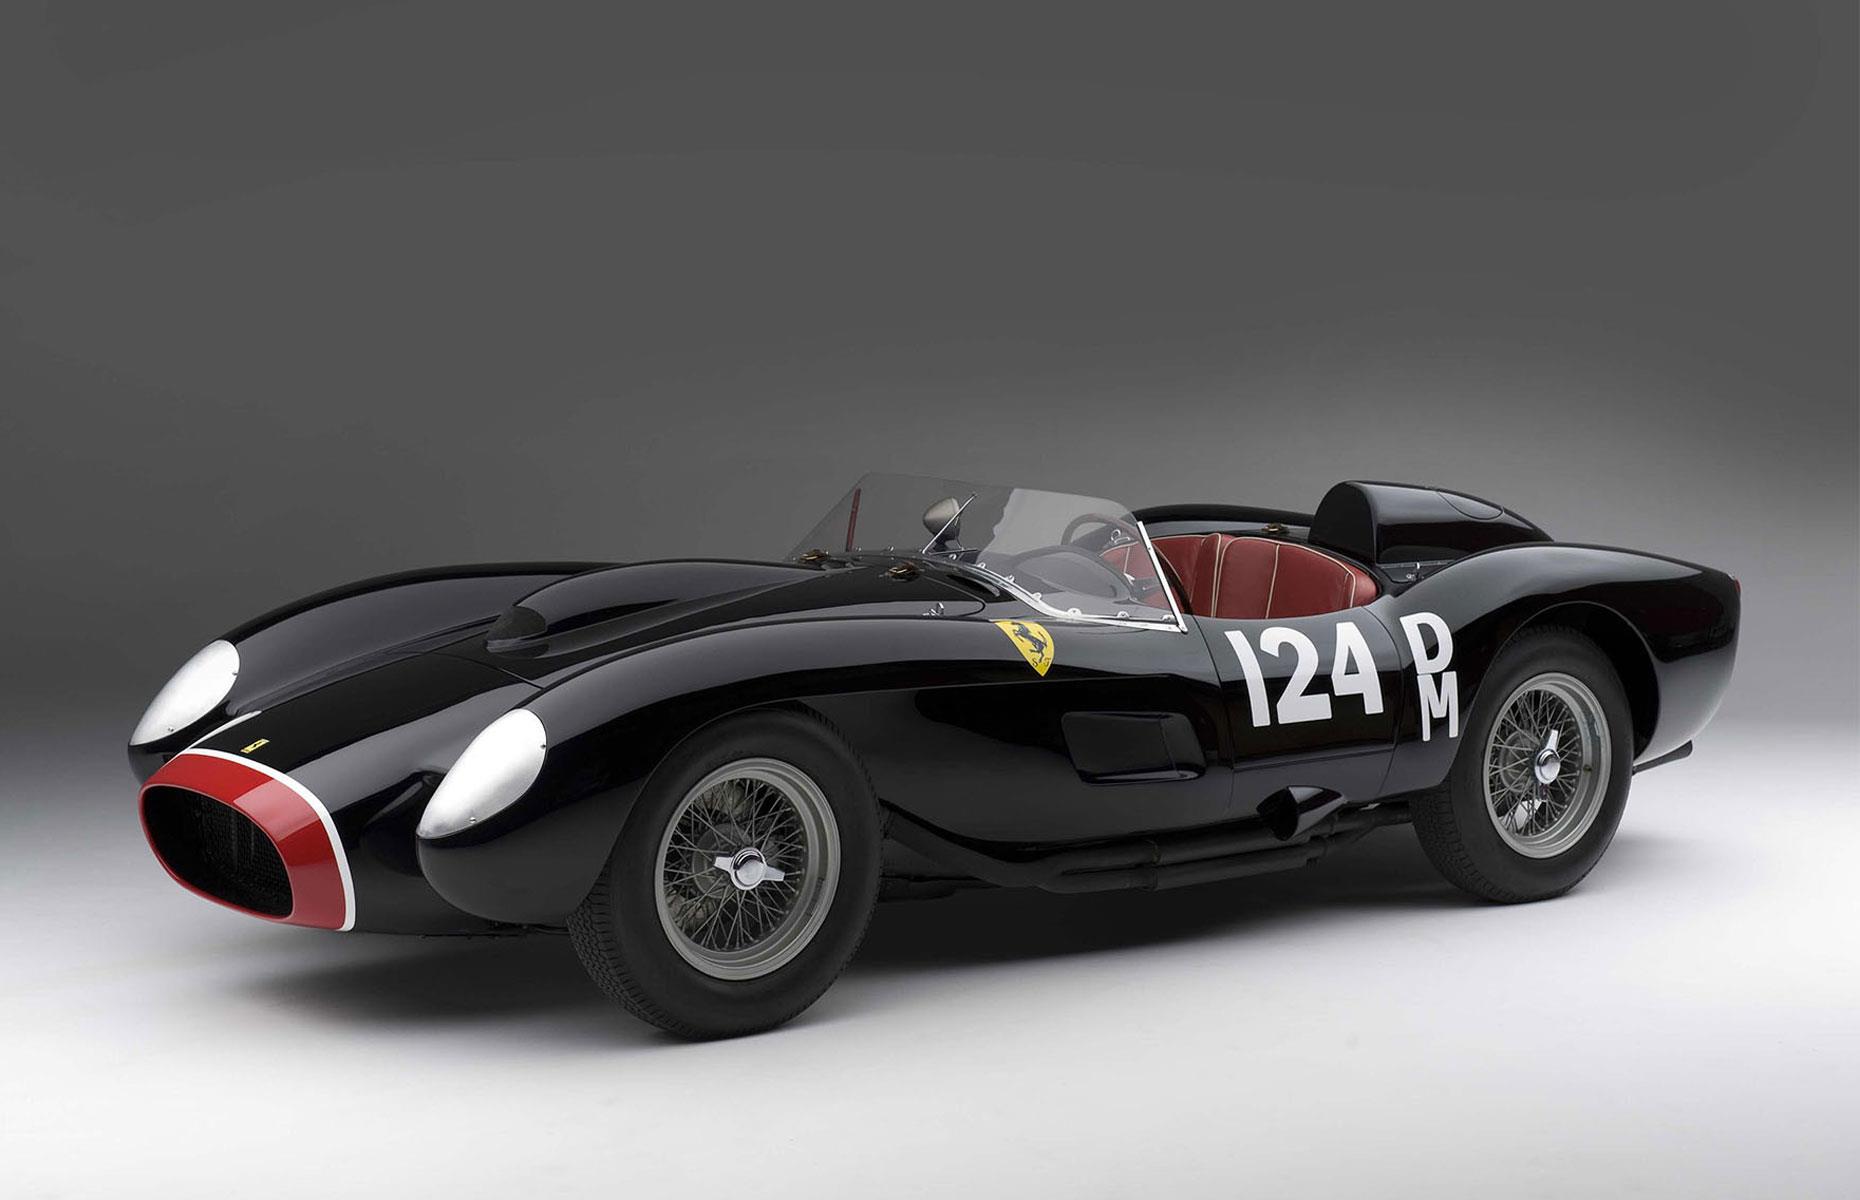 <p>Walmart heir Rob Walton has built up an astonishing collection of classic cars, having spent millions of dollars in the process. Among his many exceedingly valuable models is a sublime 1957 Ferrari 250 Testa Rossa that Walton purchased for $12.1 million (£8.5m) in 2009, but the vintage vehicle could now be worth up to $40 million (£28.7m).</p>